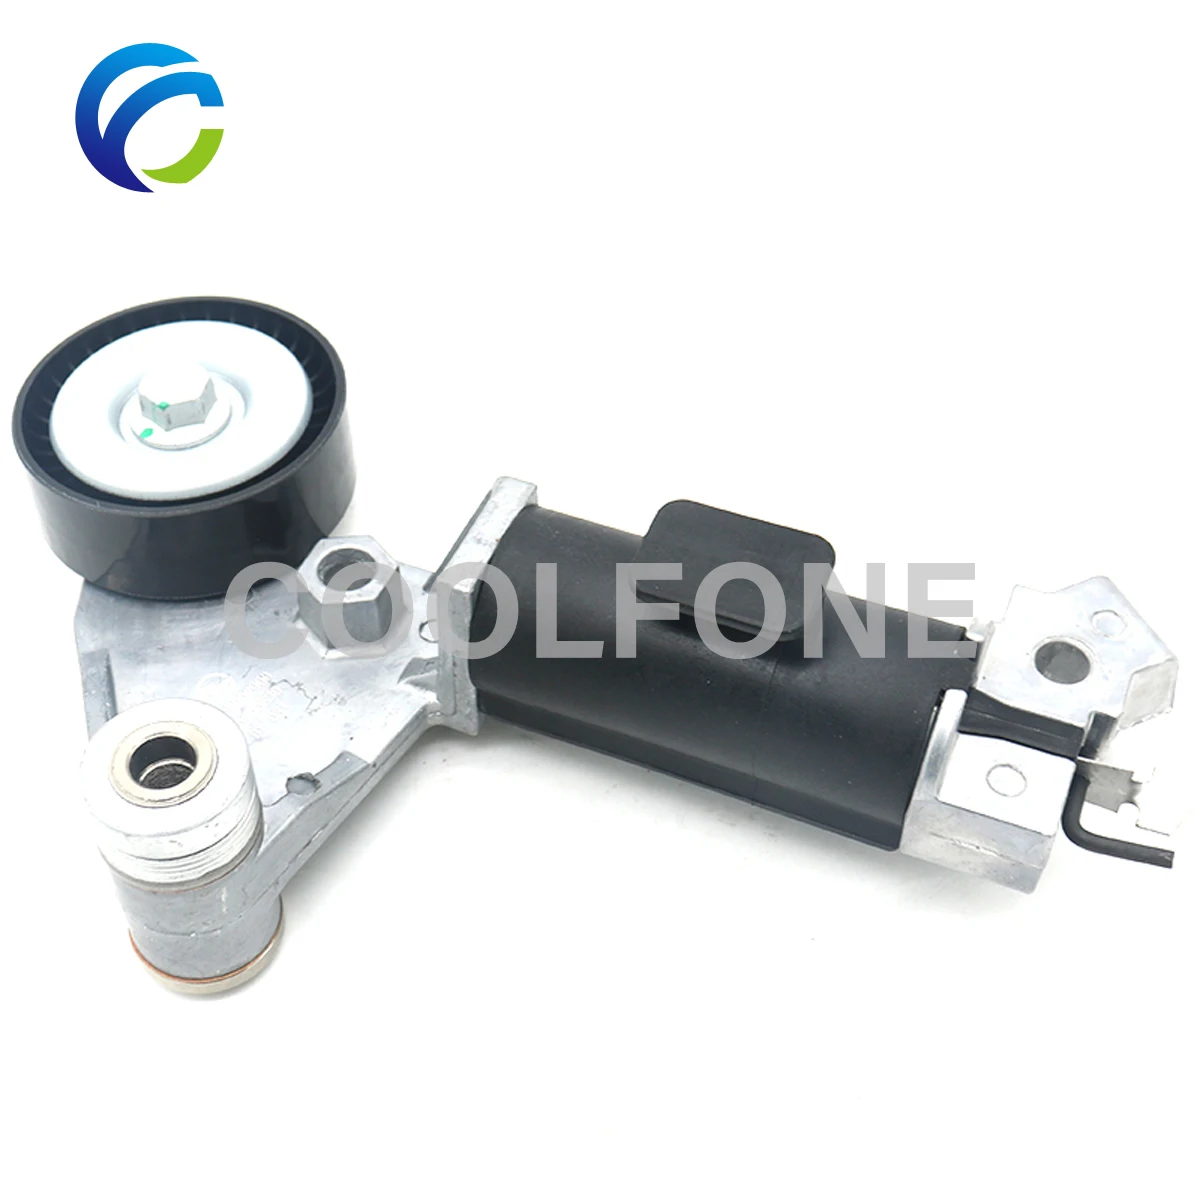 

Drive Belt Automatic Tensioner for GEELY EMGRAND EC7 Emgrand X7 SC7 VISION GC7 JL4G18 01653164 512045